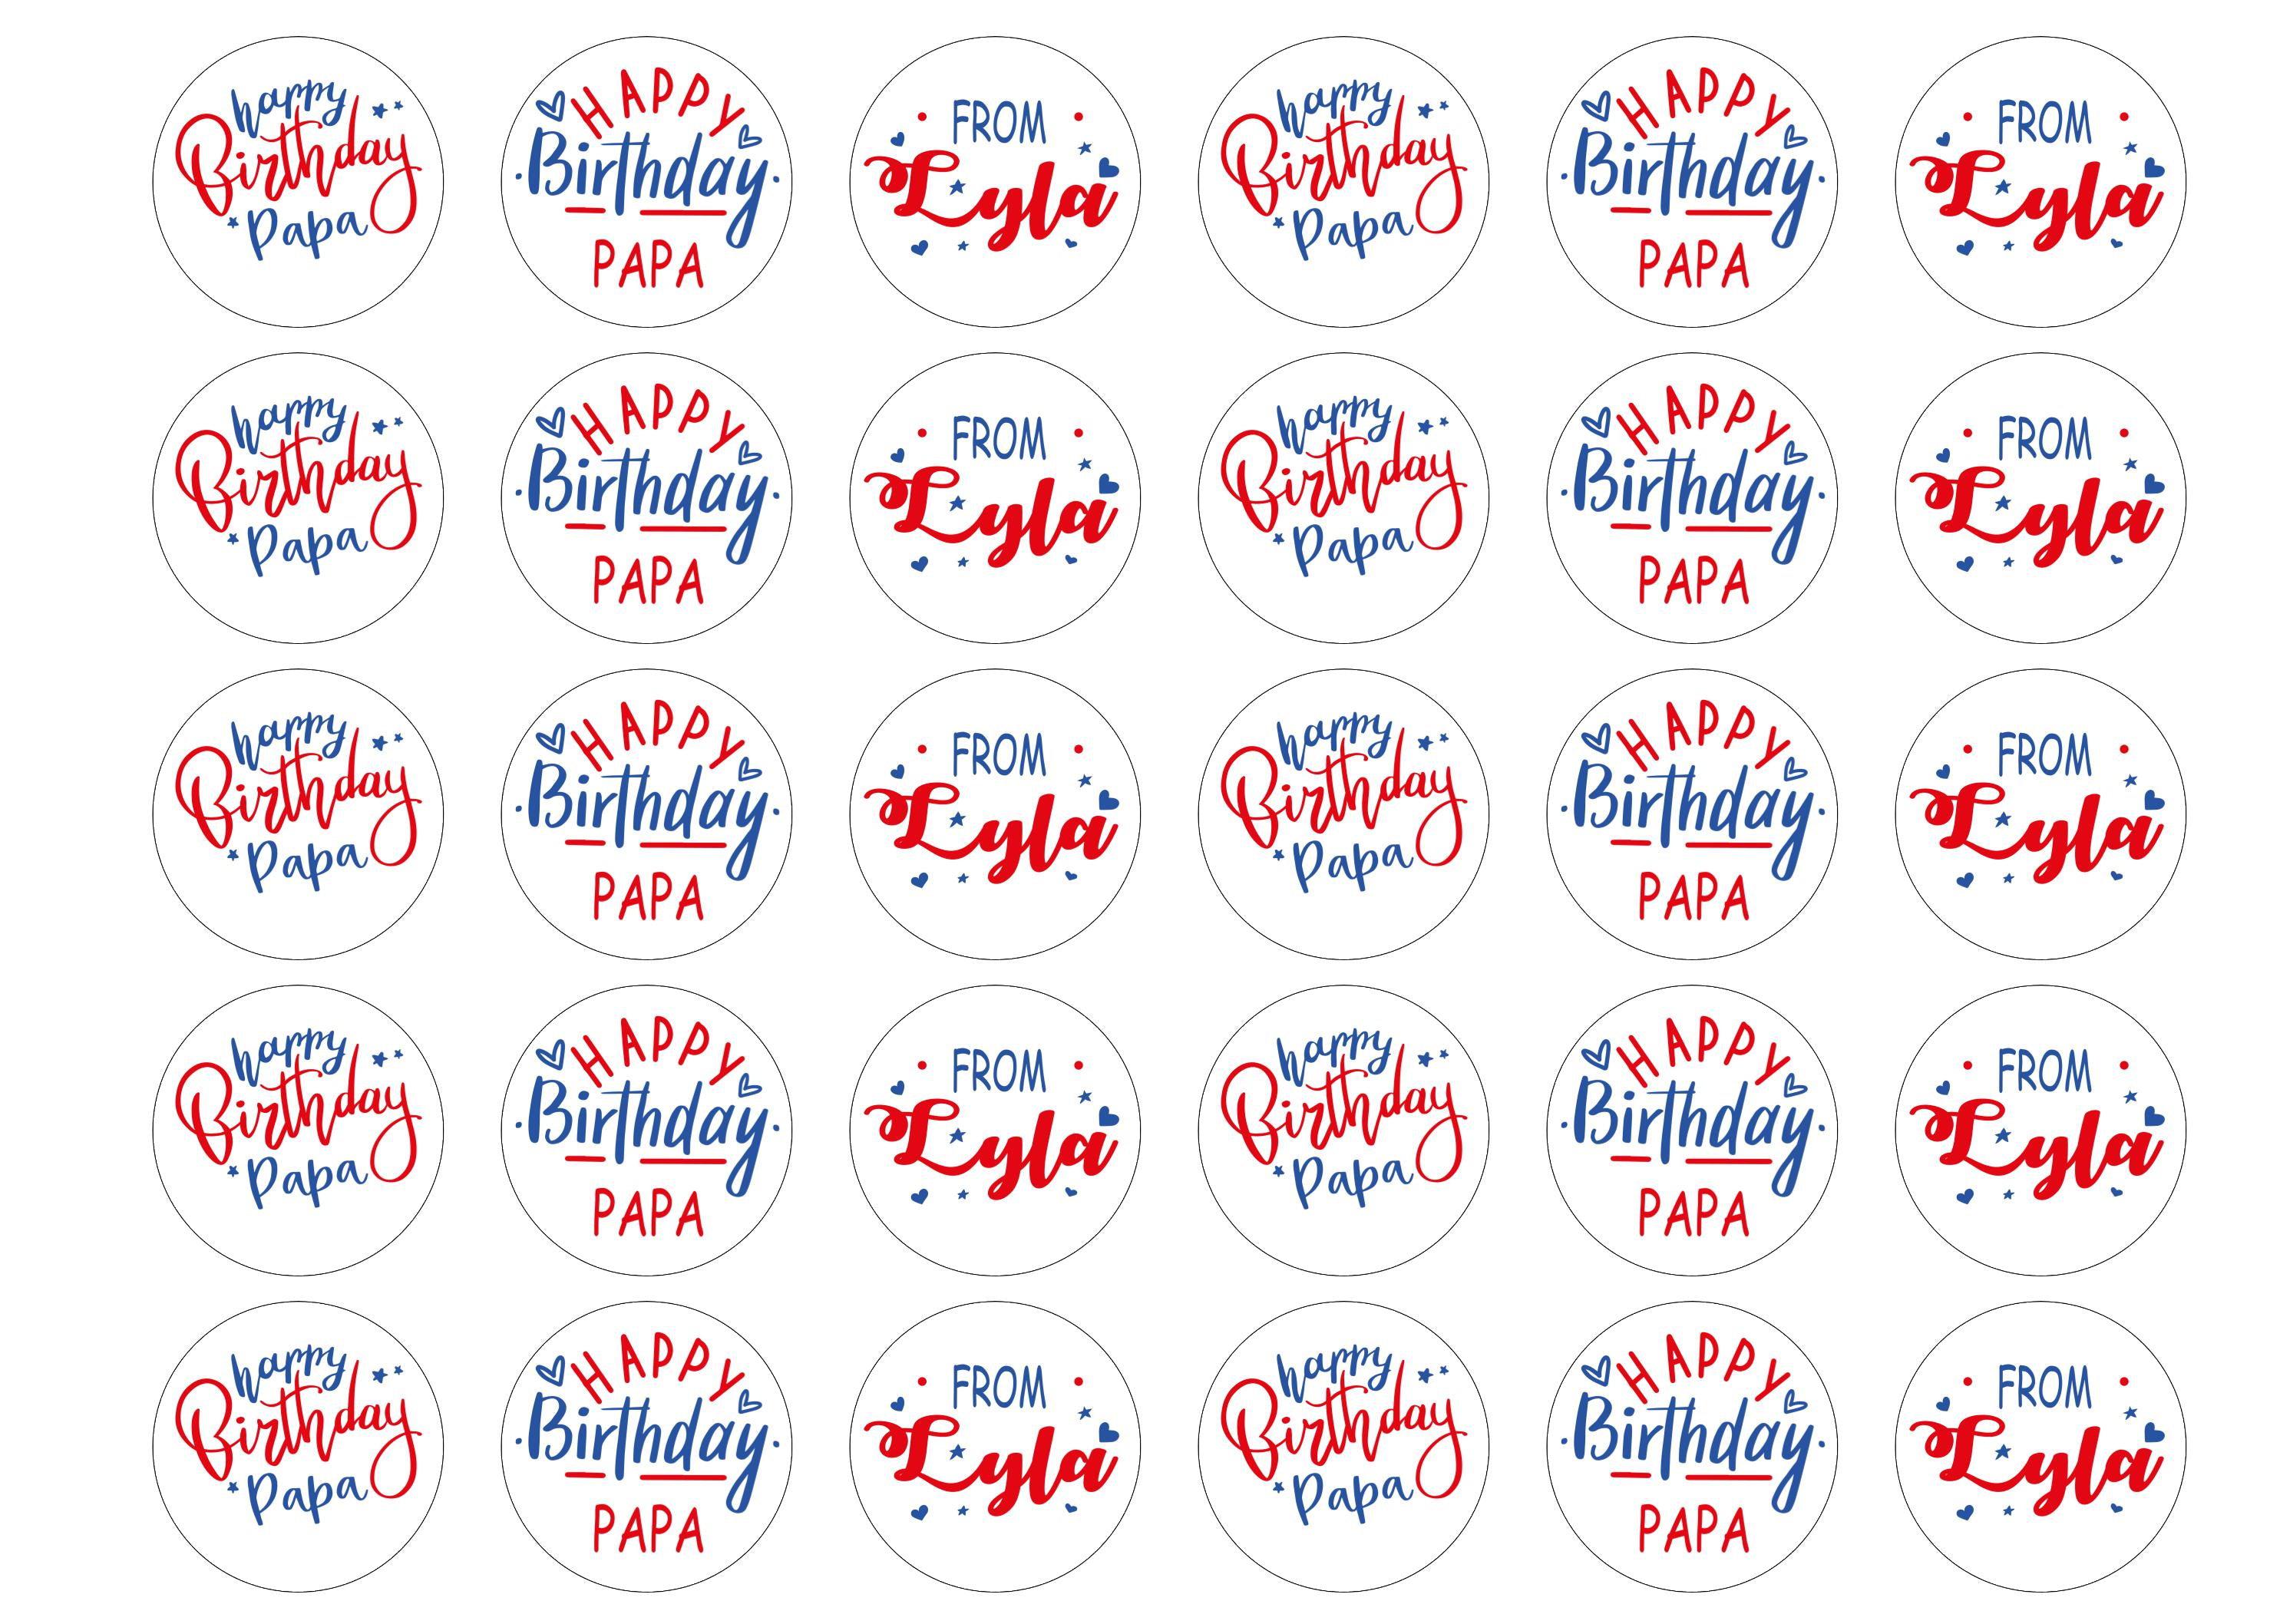 30 Personalised Birthday cupcake toppers with Happy Birthday Papa messages